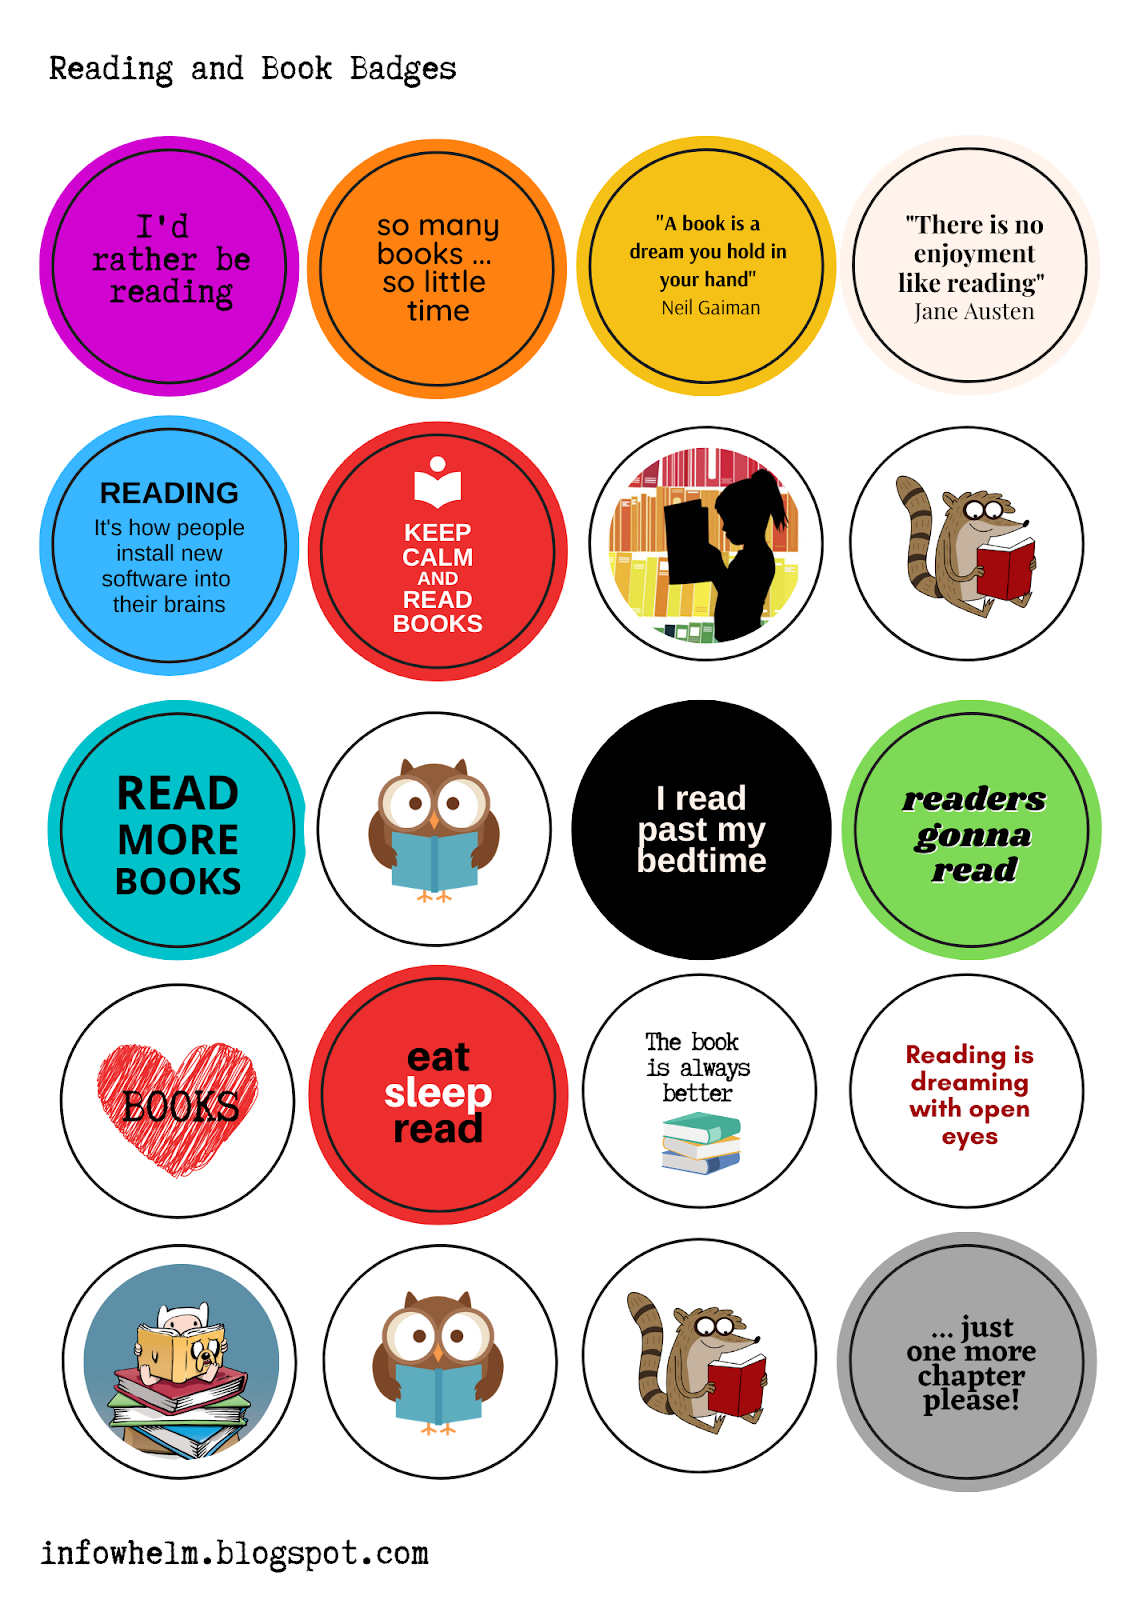 infowhelm-a-journey-into-librarianship-free-badge-printable-reading